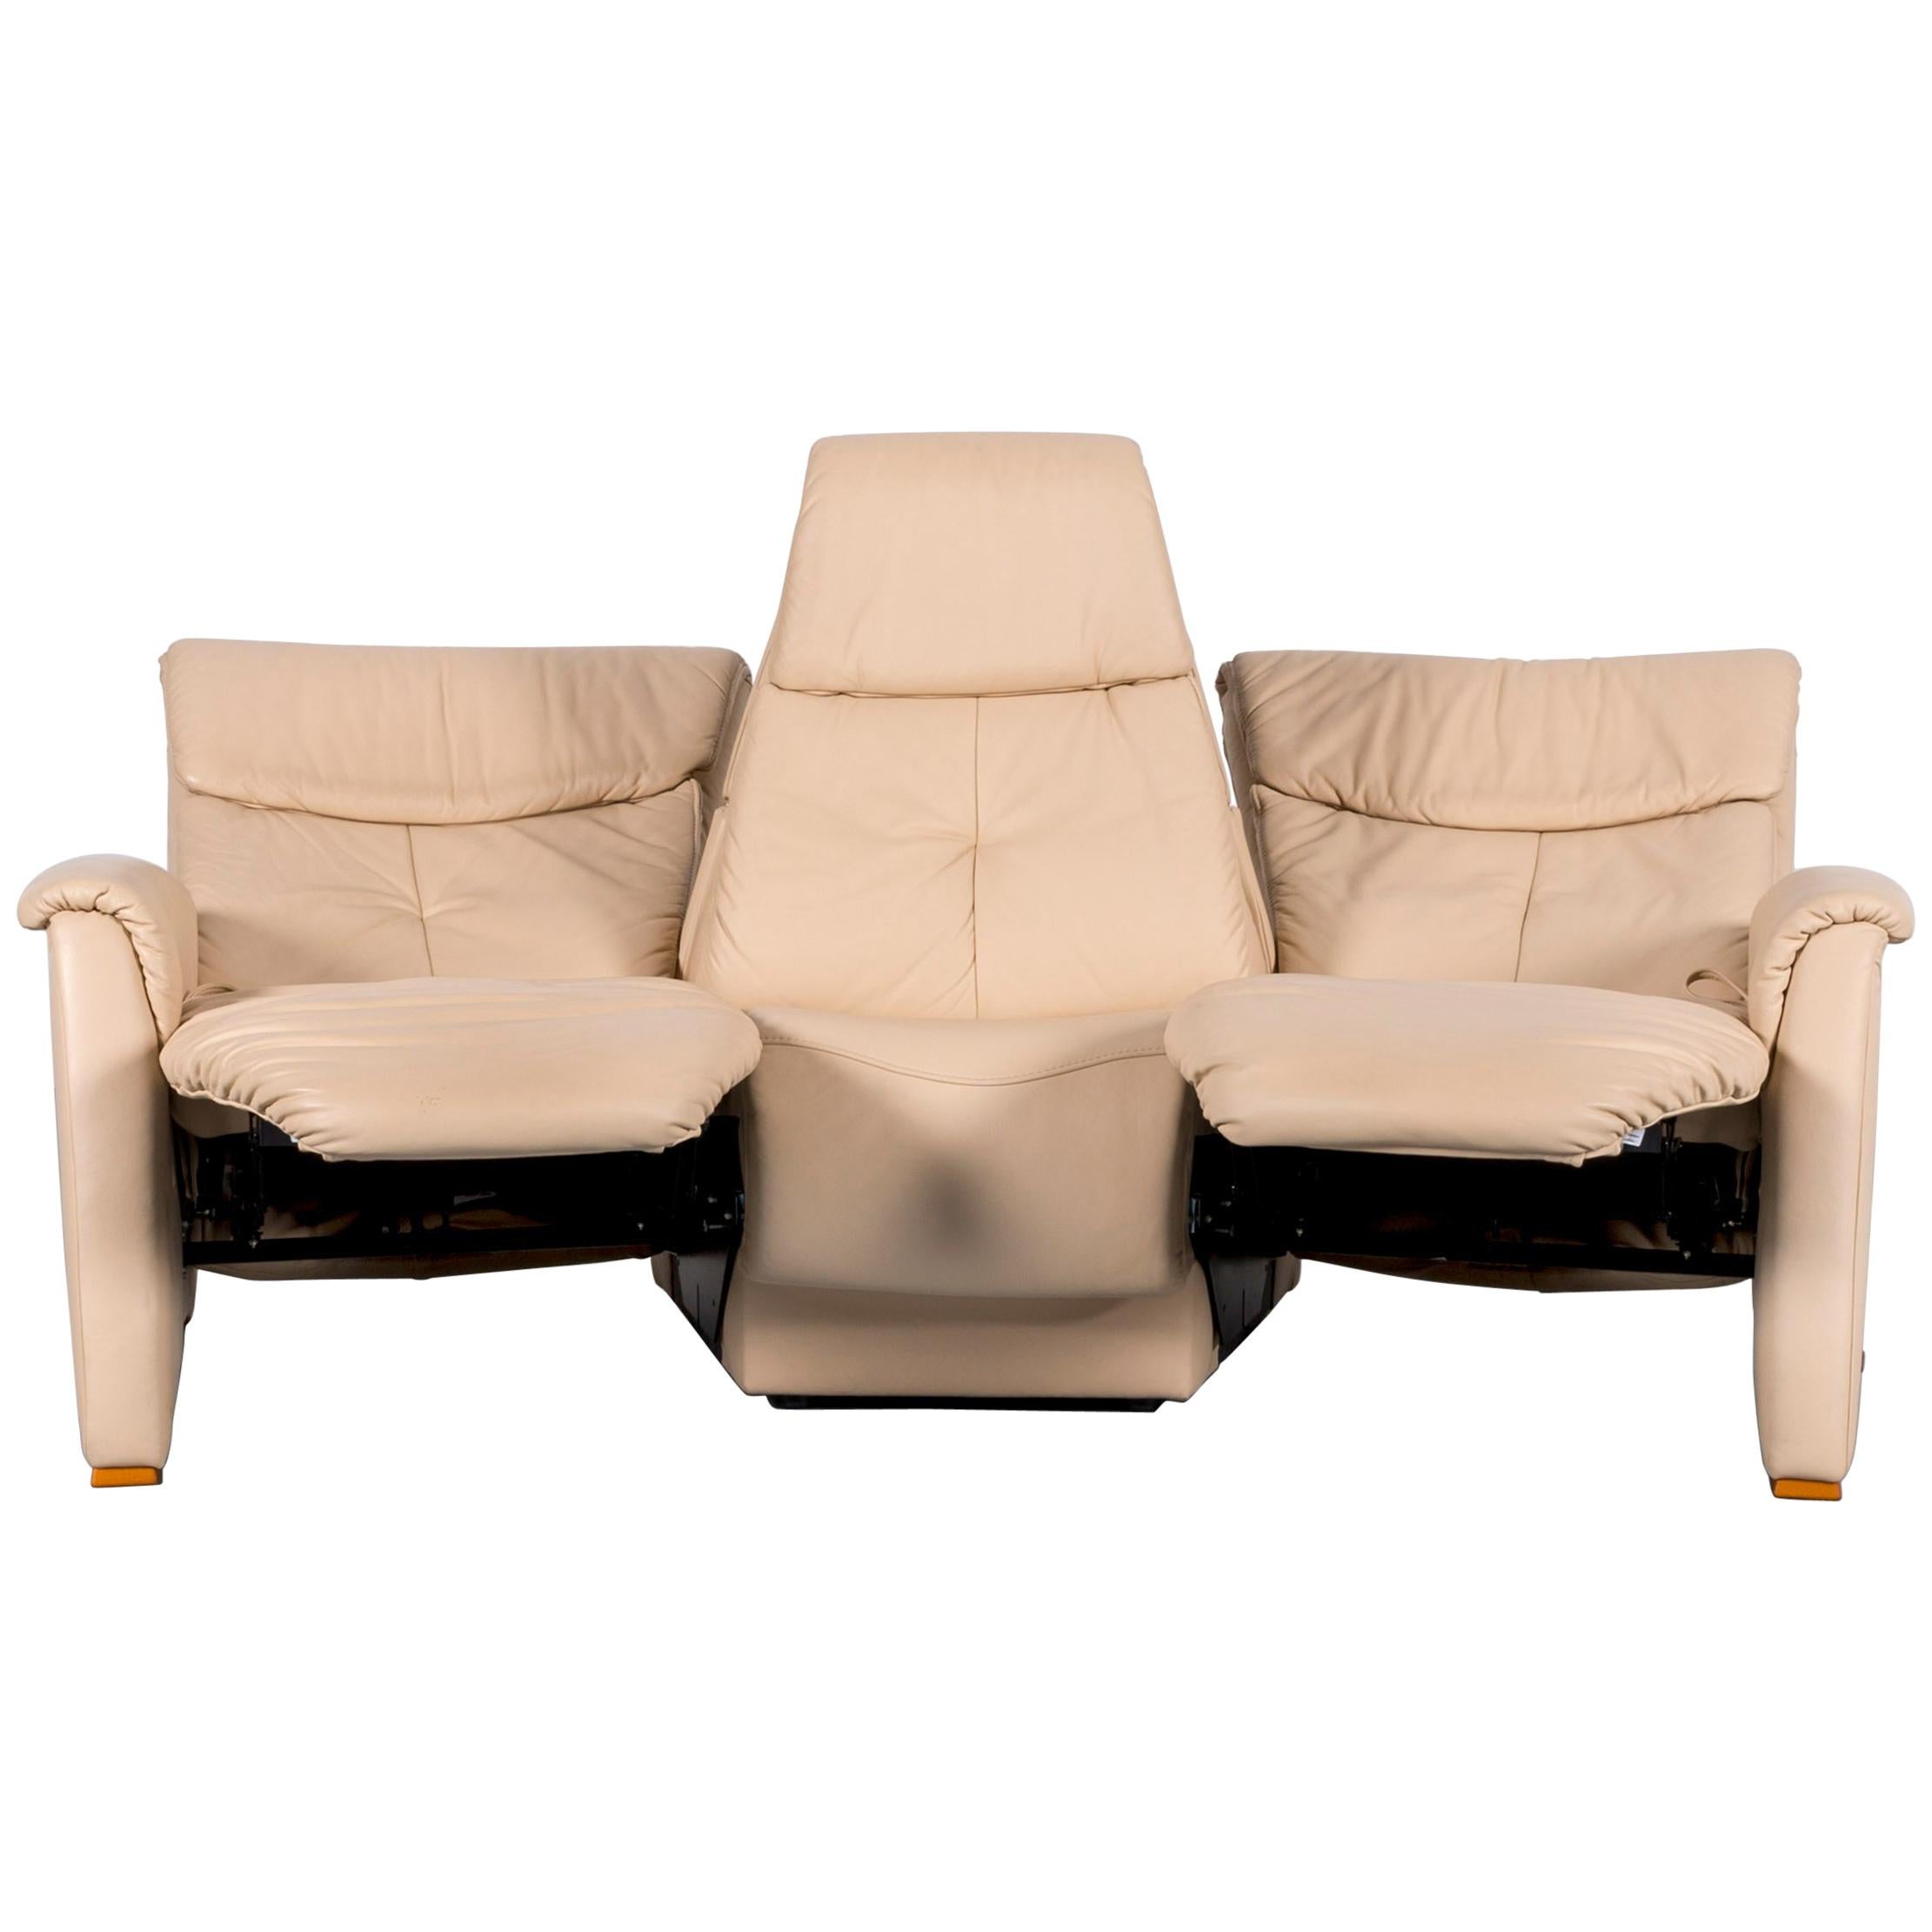 Himolla Trapez Sofa Off-White Three-Seat Couch Recliner For Sale